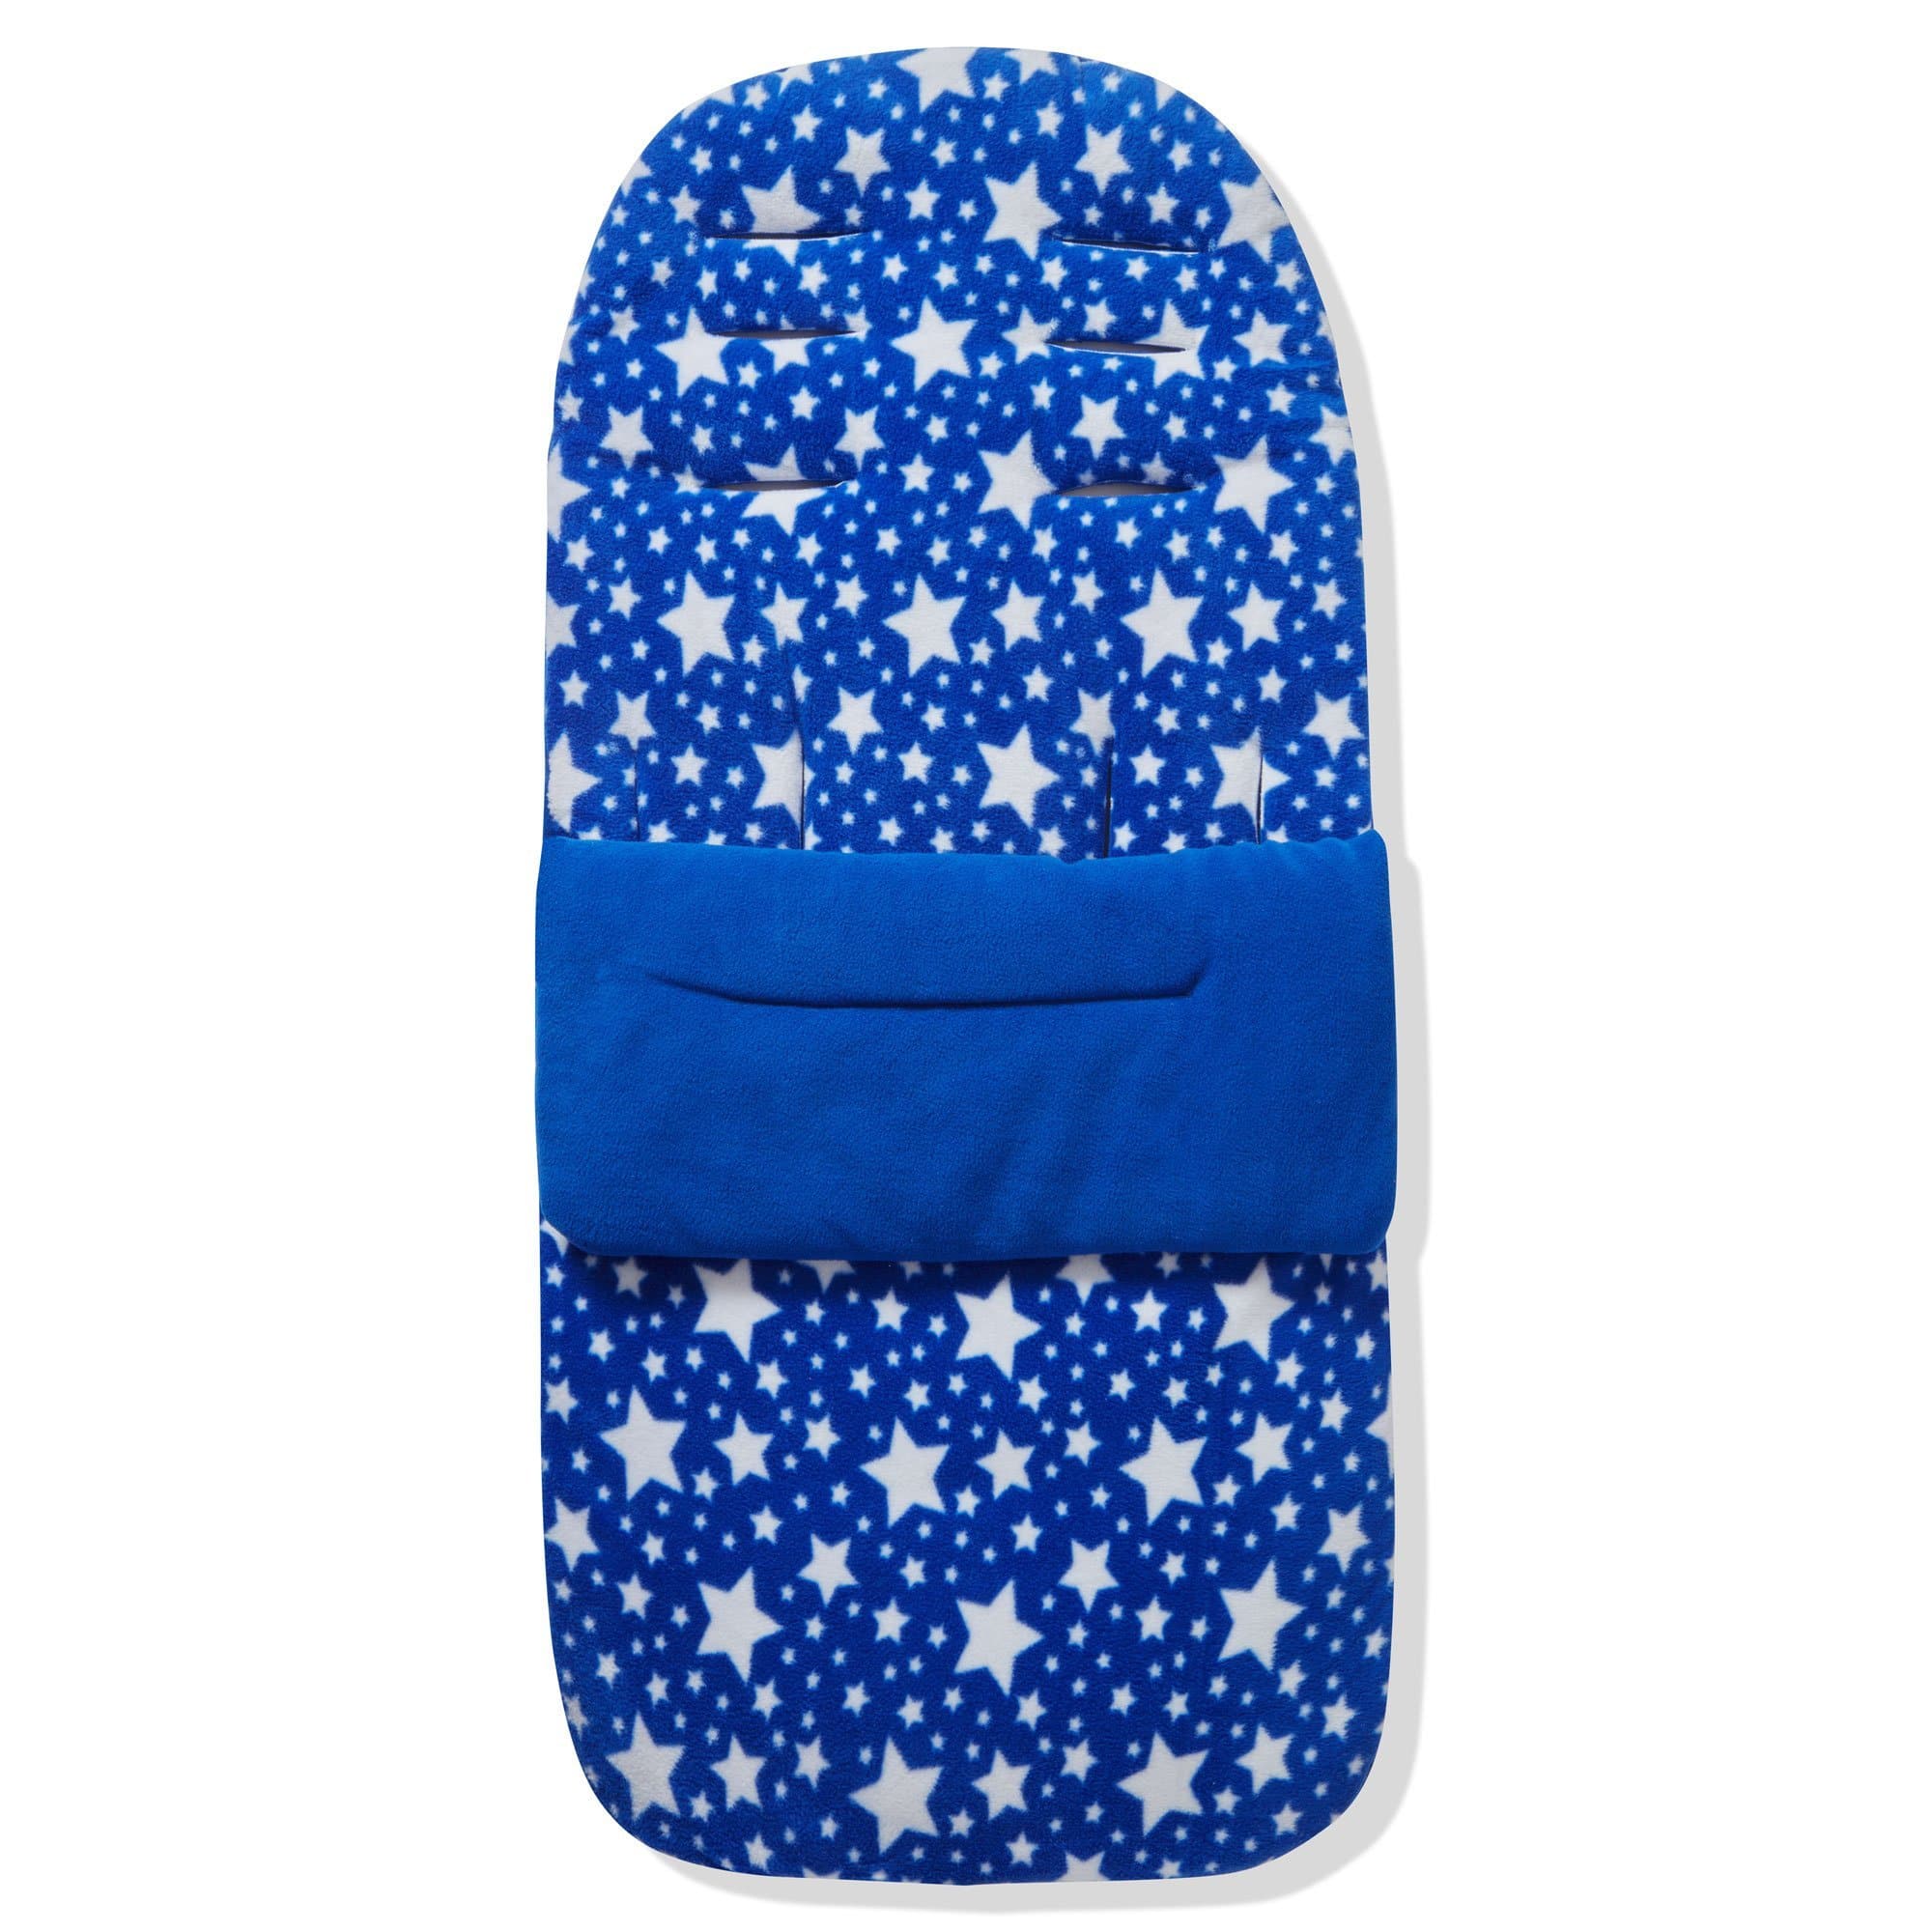 Fleece Footmuff / Cosy Toes Compatible with Babywelt - Blue Star / Fits All Models | For Your Little One